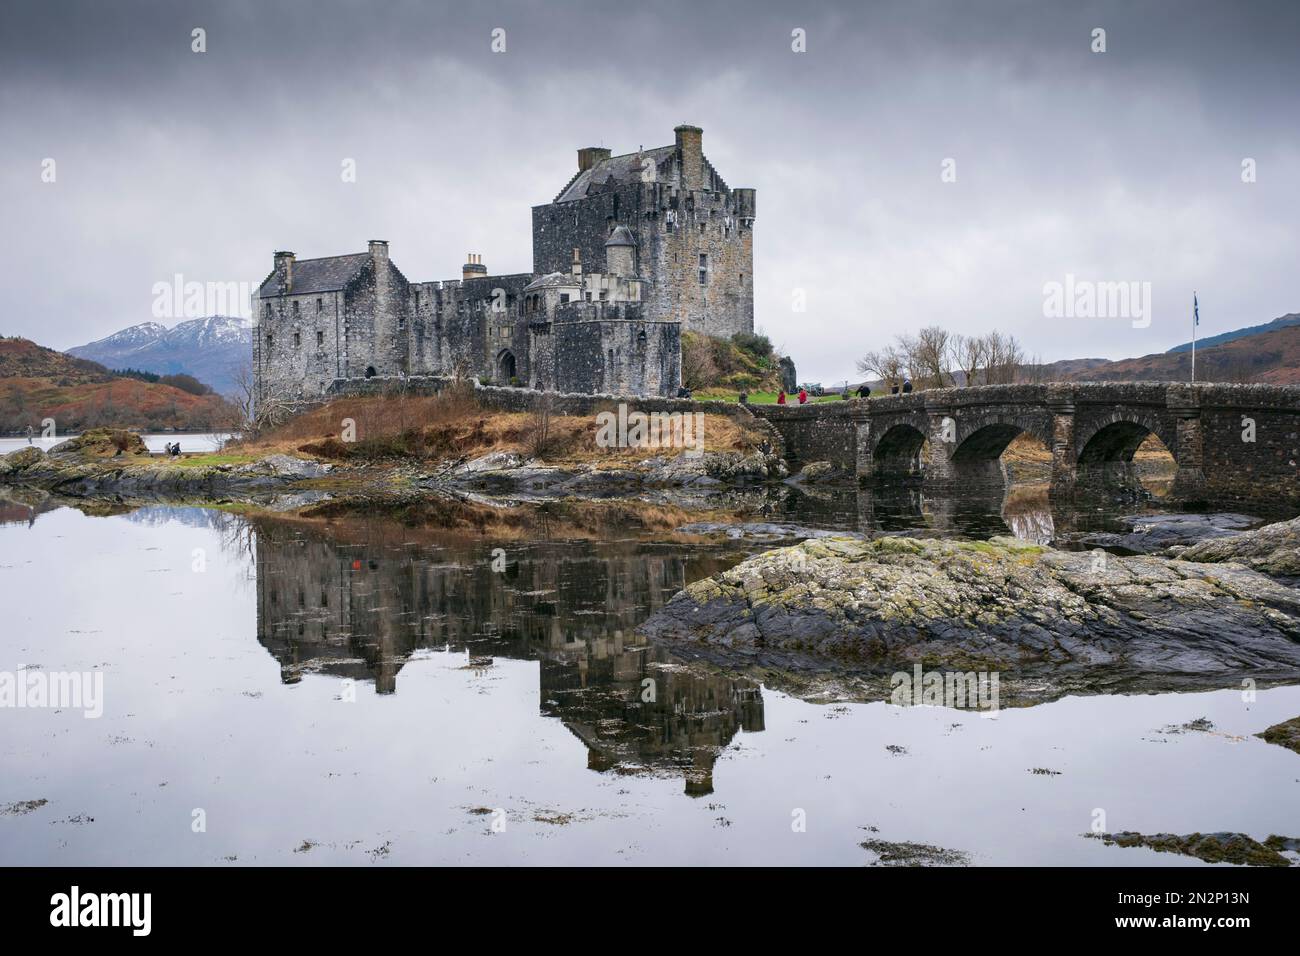 Scotland, Highlands, the medieval Eilean Donan castle, Kyle of Lochalsh, winter view with Loch Alsh lake and snowy mountains Stock Photo